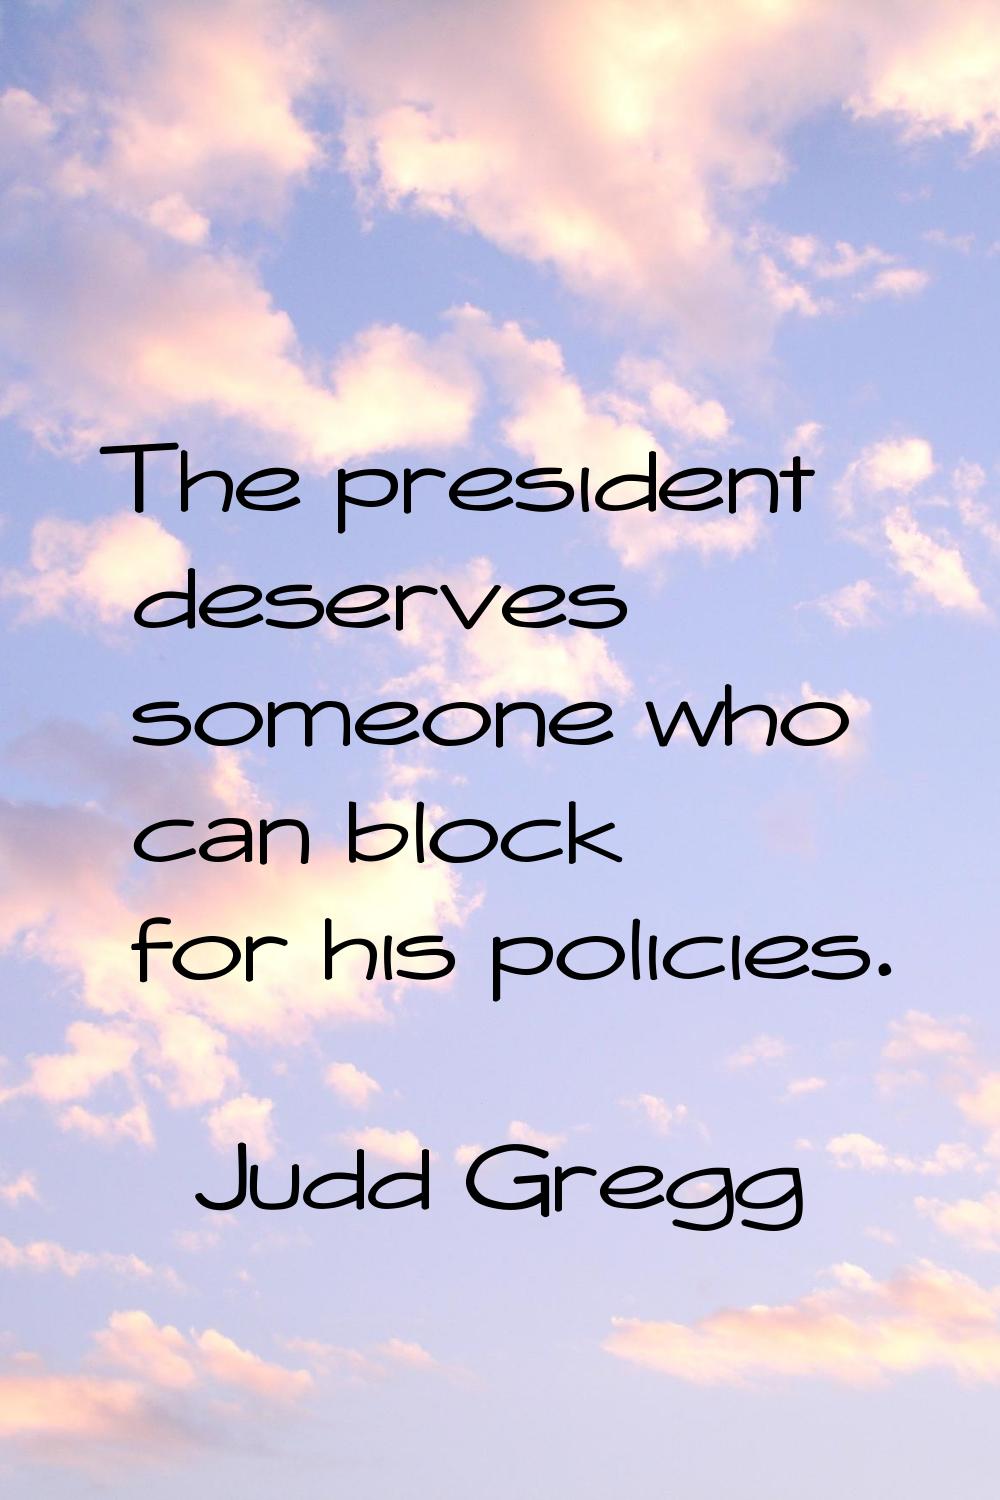 The president deserves someone who can block for his policies.